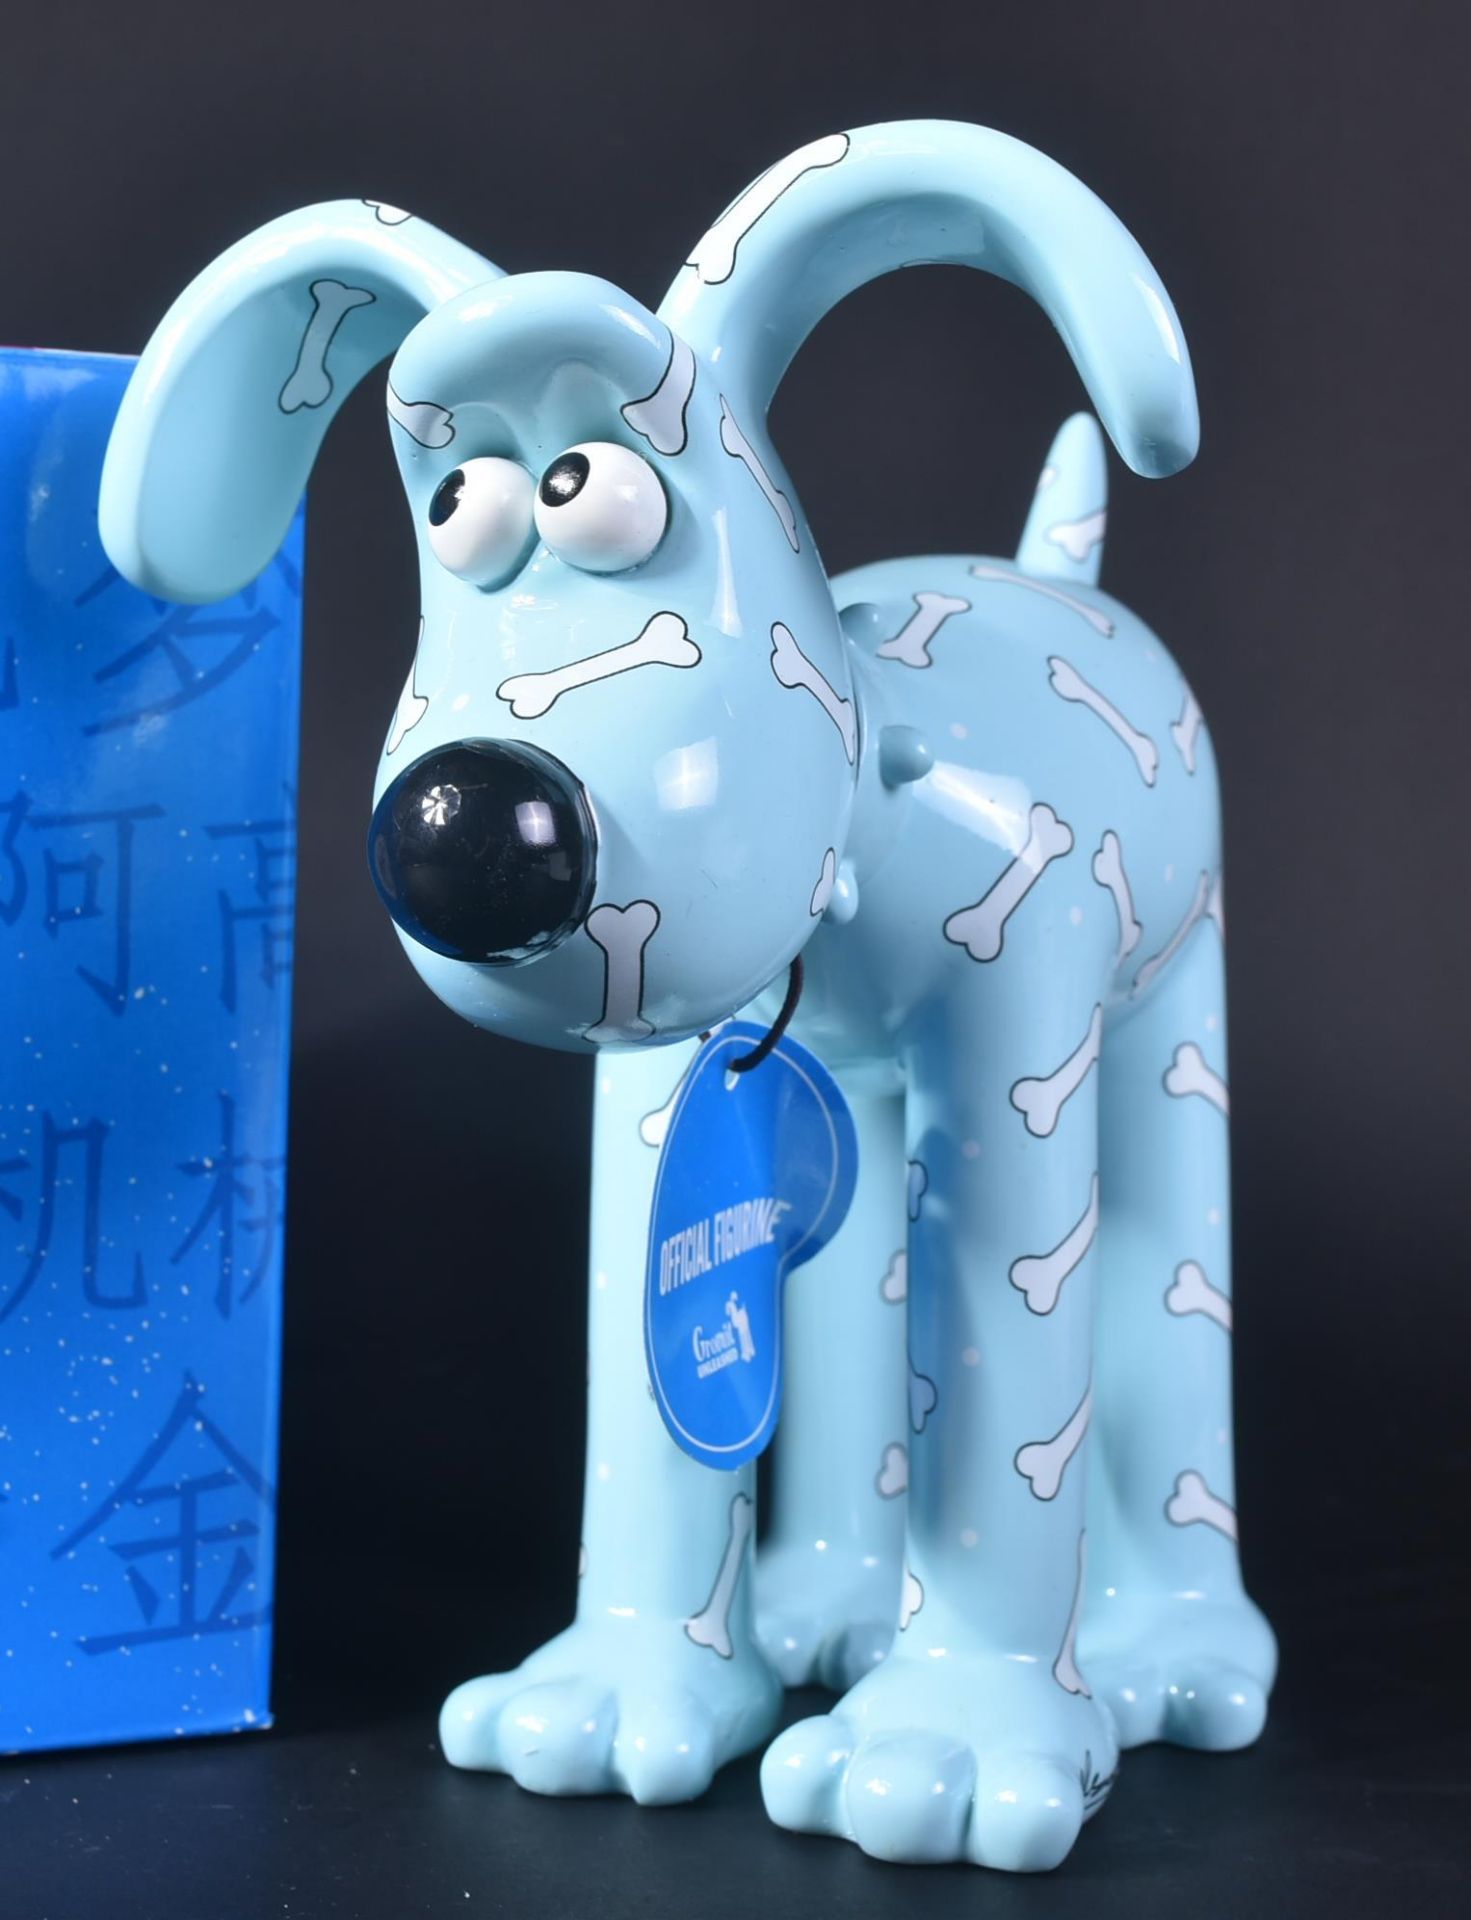 WALLACE & GROMIT - GROMIT UNLEASHED COLLECTABLE FIGURINE - Image 2 of 5